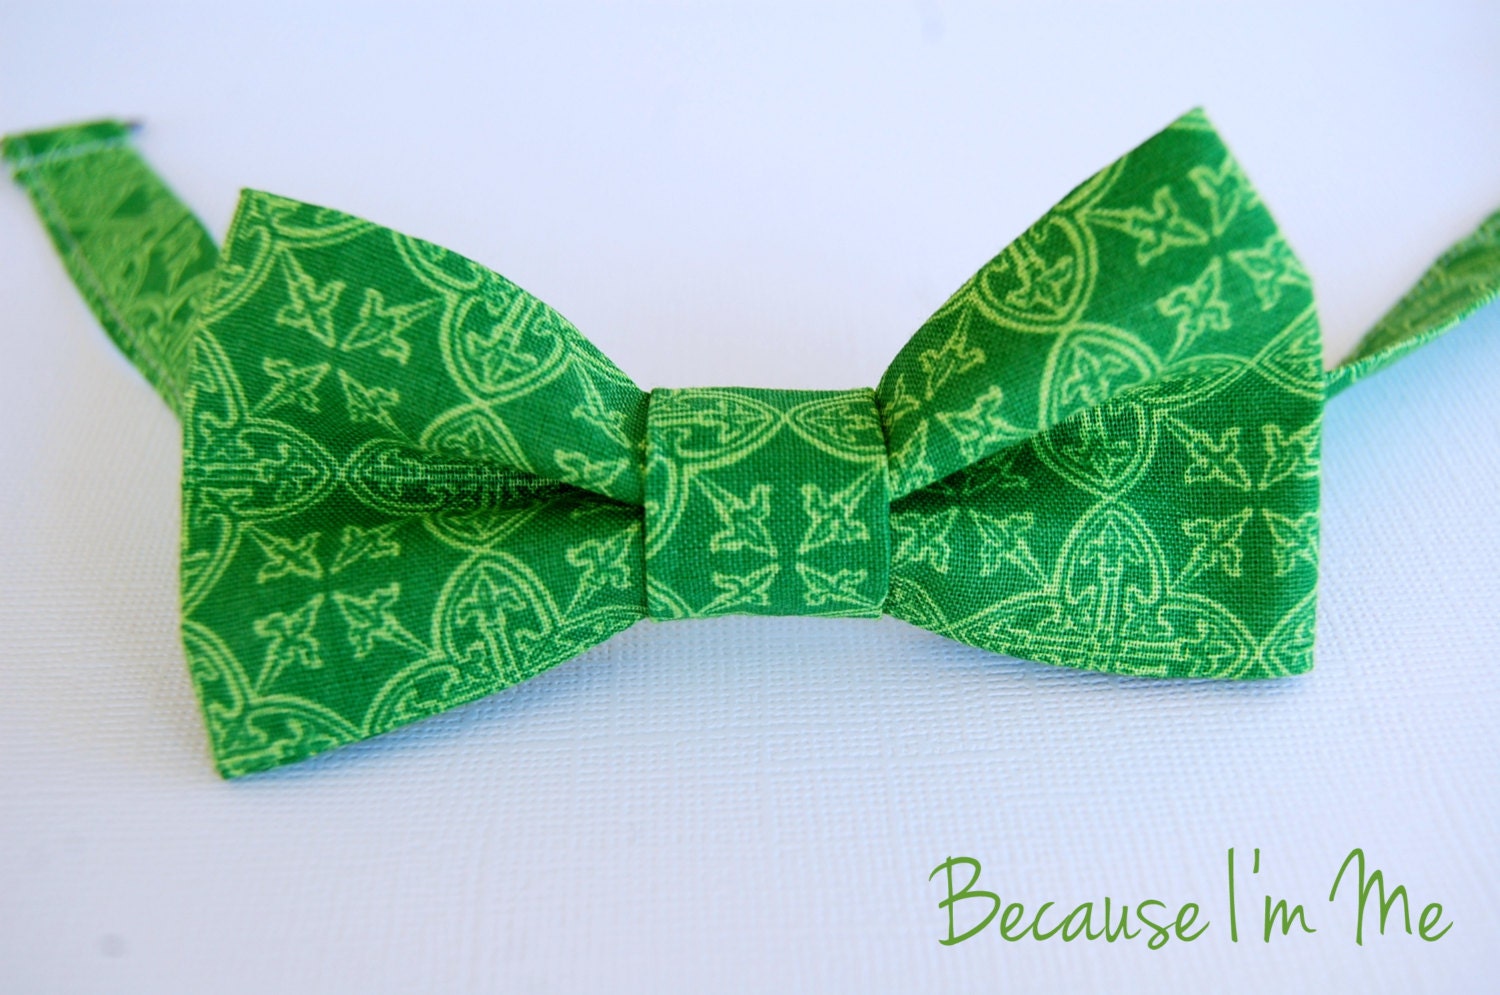 Lovely Mens Green Gaelic Print Bow Tie - Fun, Sophisticated bowtie is pretied and adjustable - becauseimme